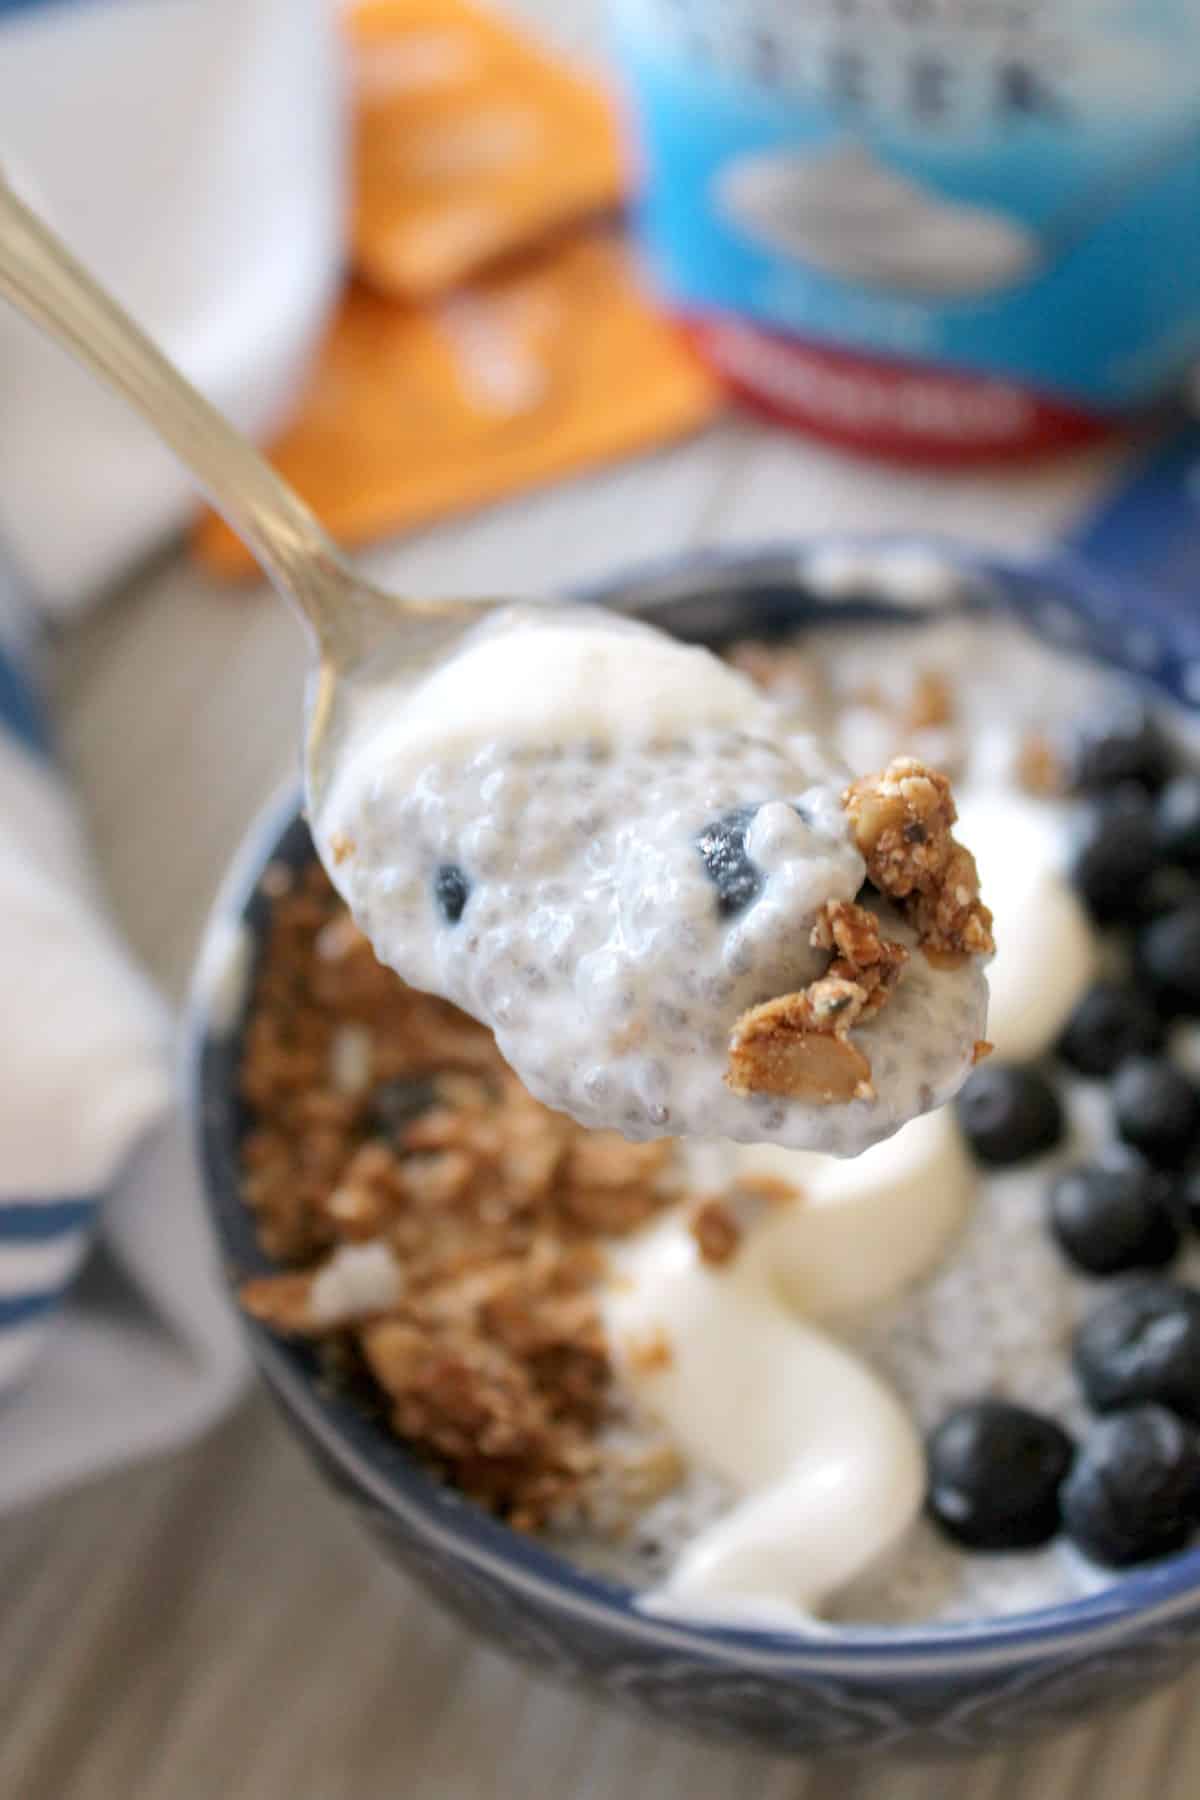 Blueberry-Ginger Chia Pudding -- brimming with nutritious qualities, chia pudding may just become your go-to breakfast or snack! This version is infused with ginger flavor and topped with berries, crunchy granola and a swirl of creamy yogurt.